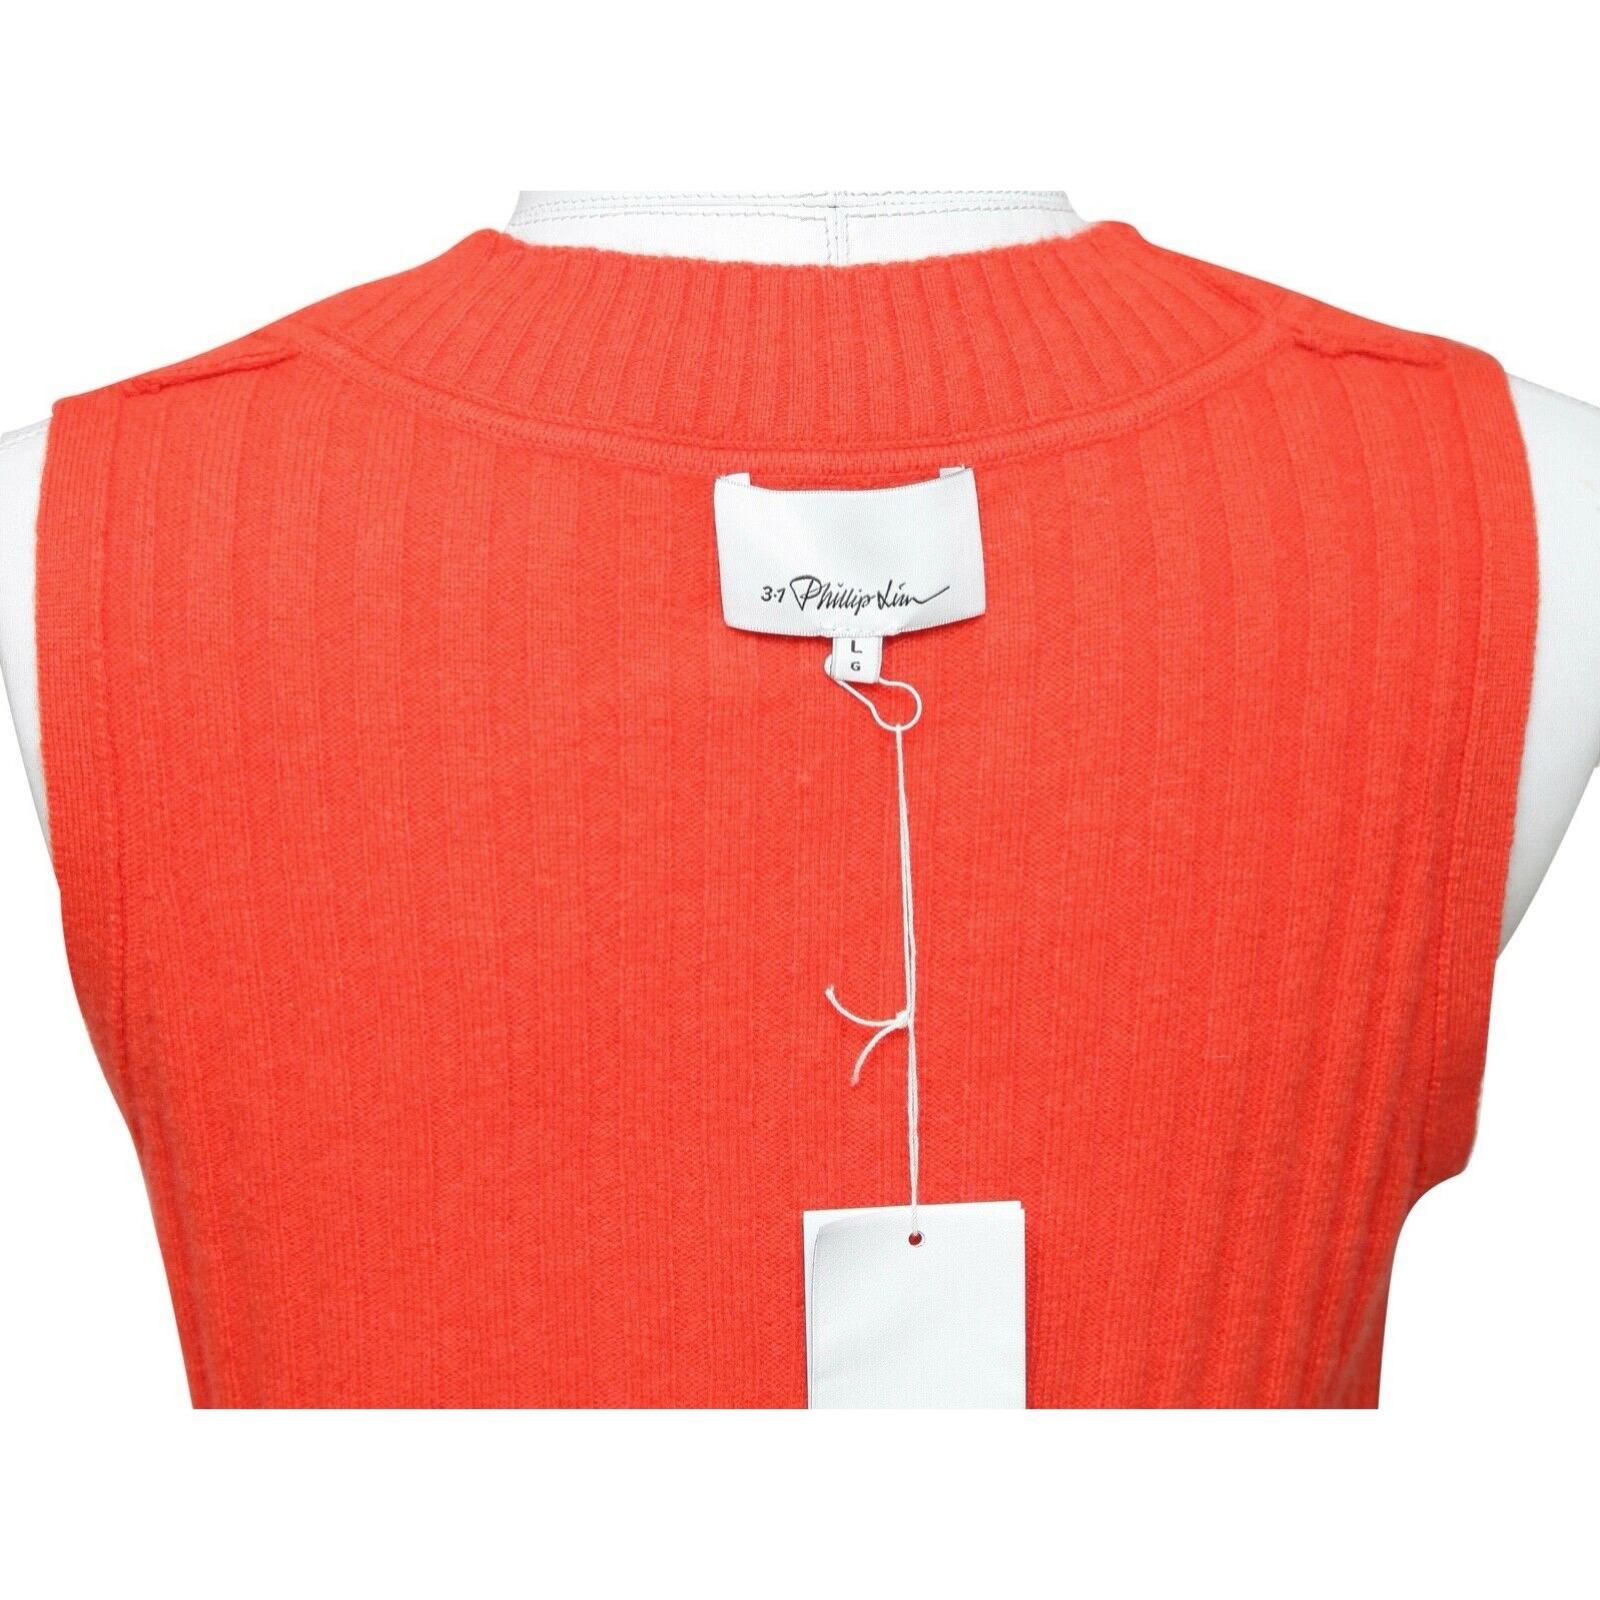 3.1 PHILLIP LIM Orange Sweater Knit Sleeveless Scoop Neck Ribbed Cashmere L NWT For Sale 3